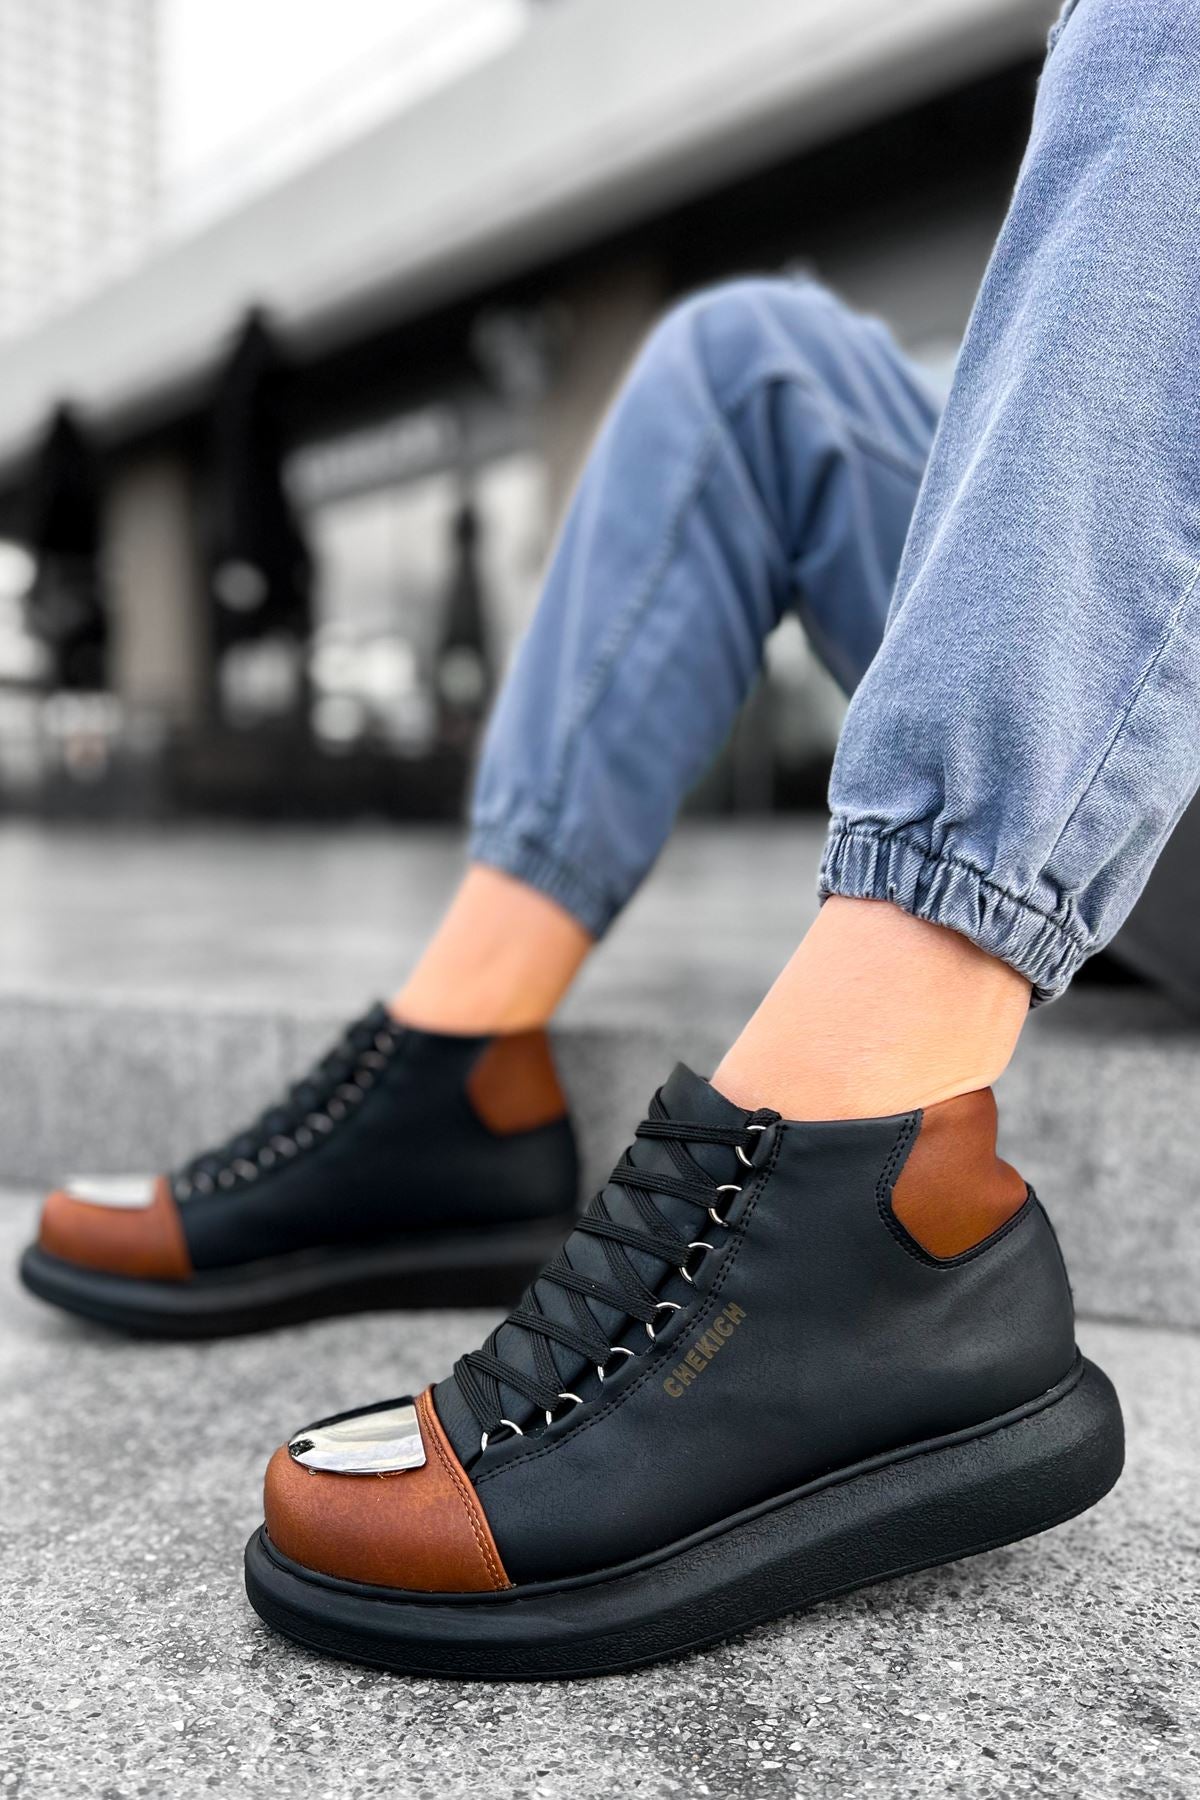 CH267 Men's Shoes sneakers Boots BLACK/TANK - STREETMODE ™